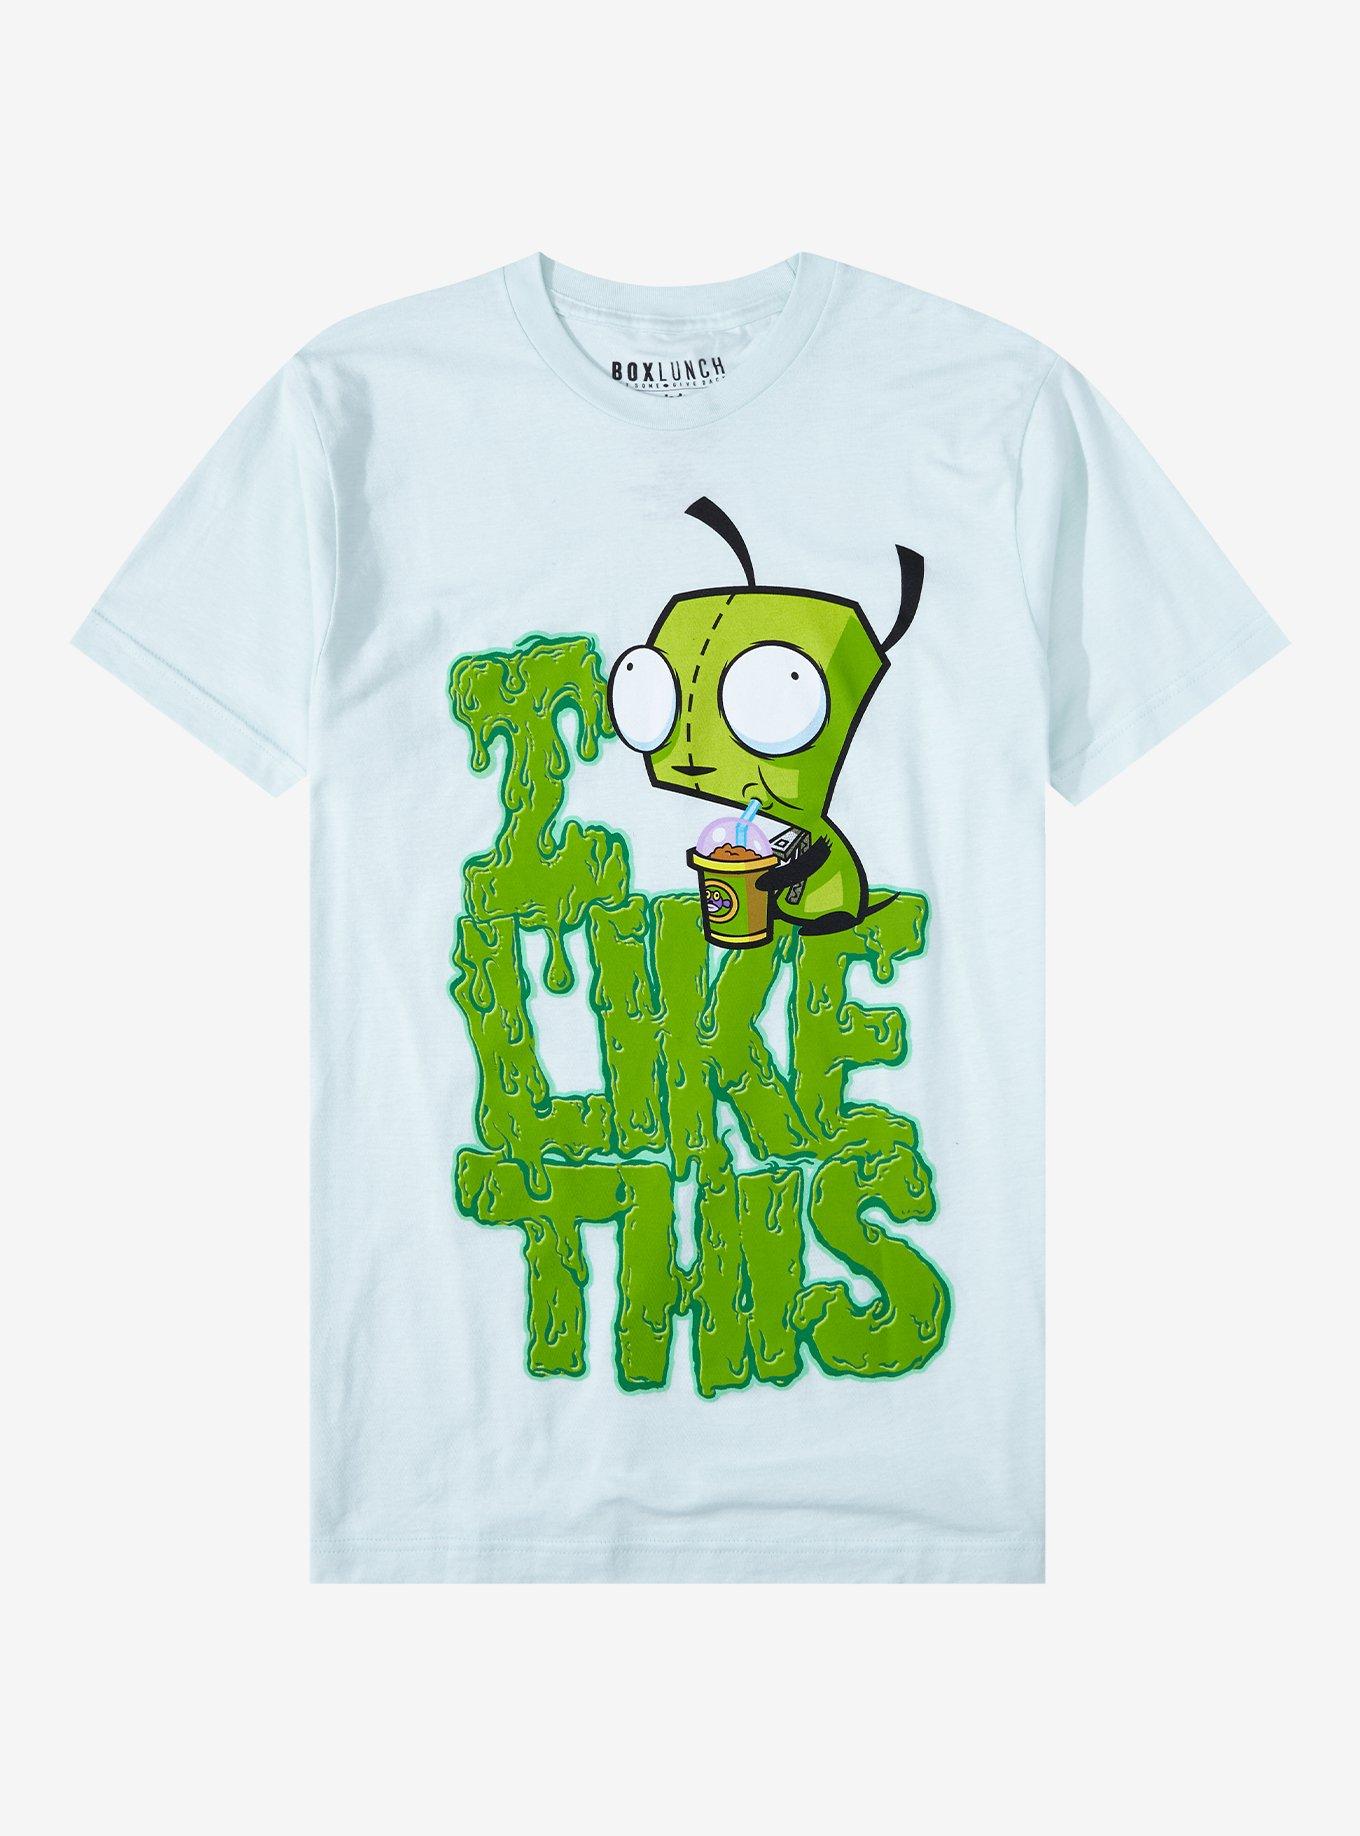 Invader Zim GIR I Like This T-Shirt - BoxLunch Exclusive, LIGHT BLUE, hi-res